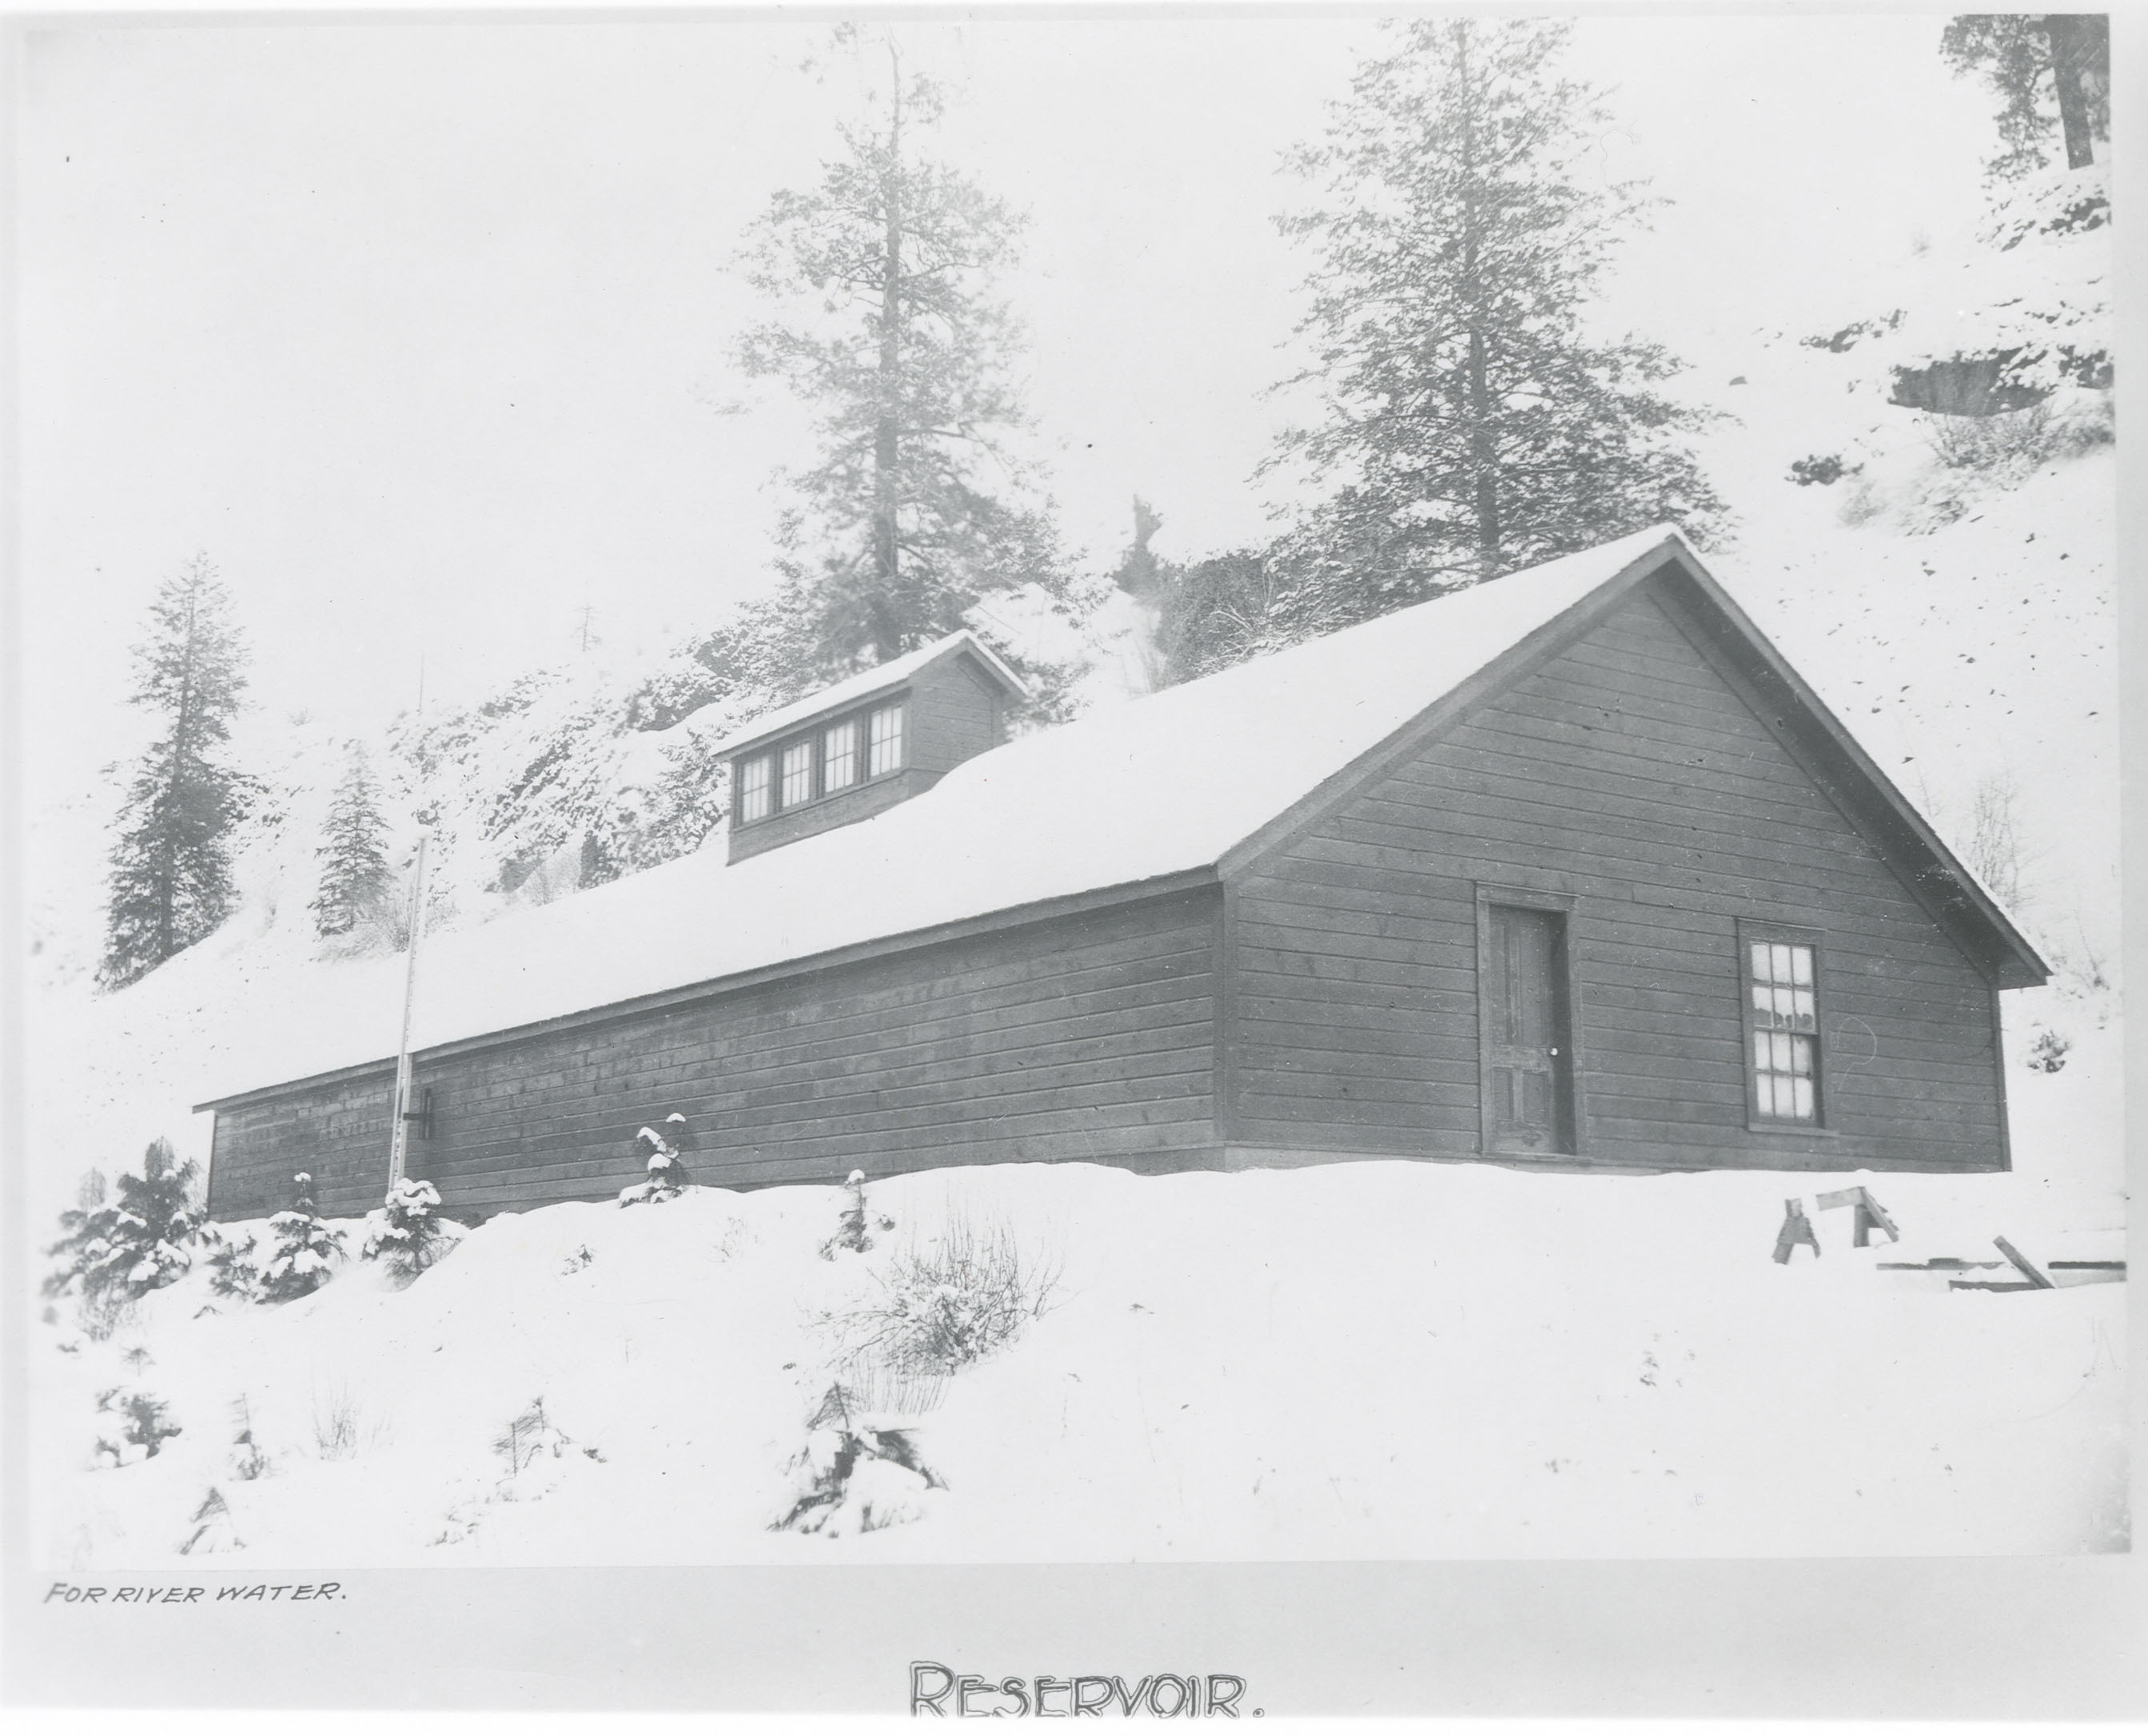 Black and white photograph of a plain wooden building in the snow